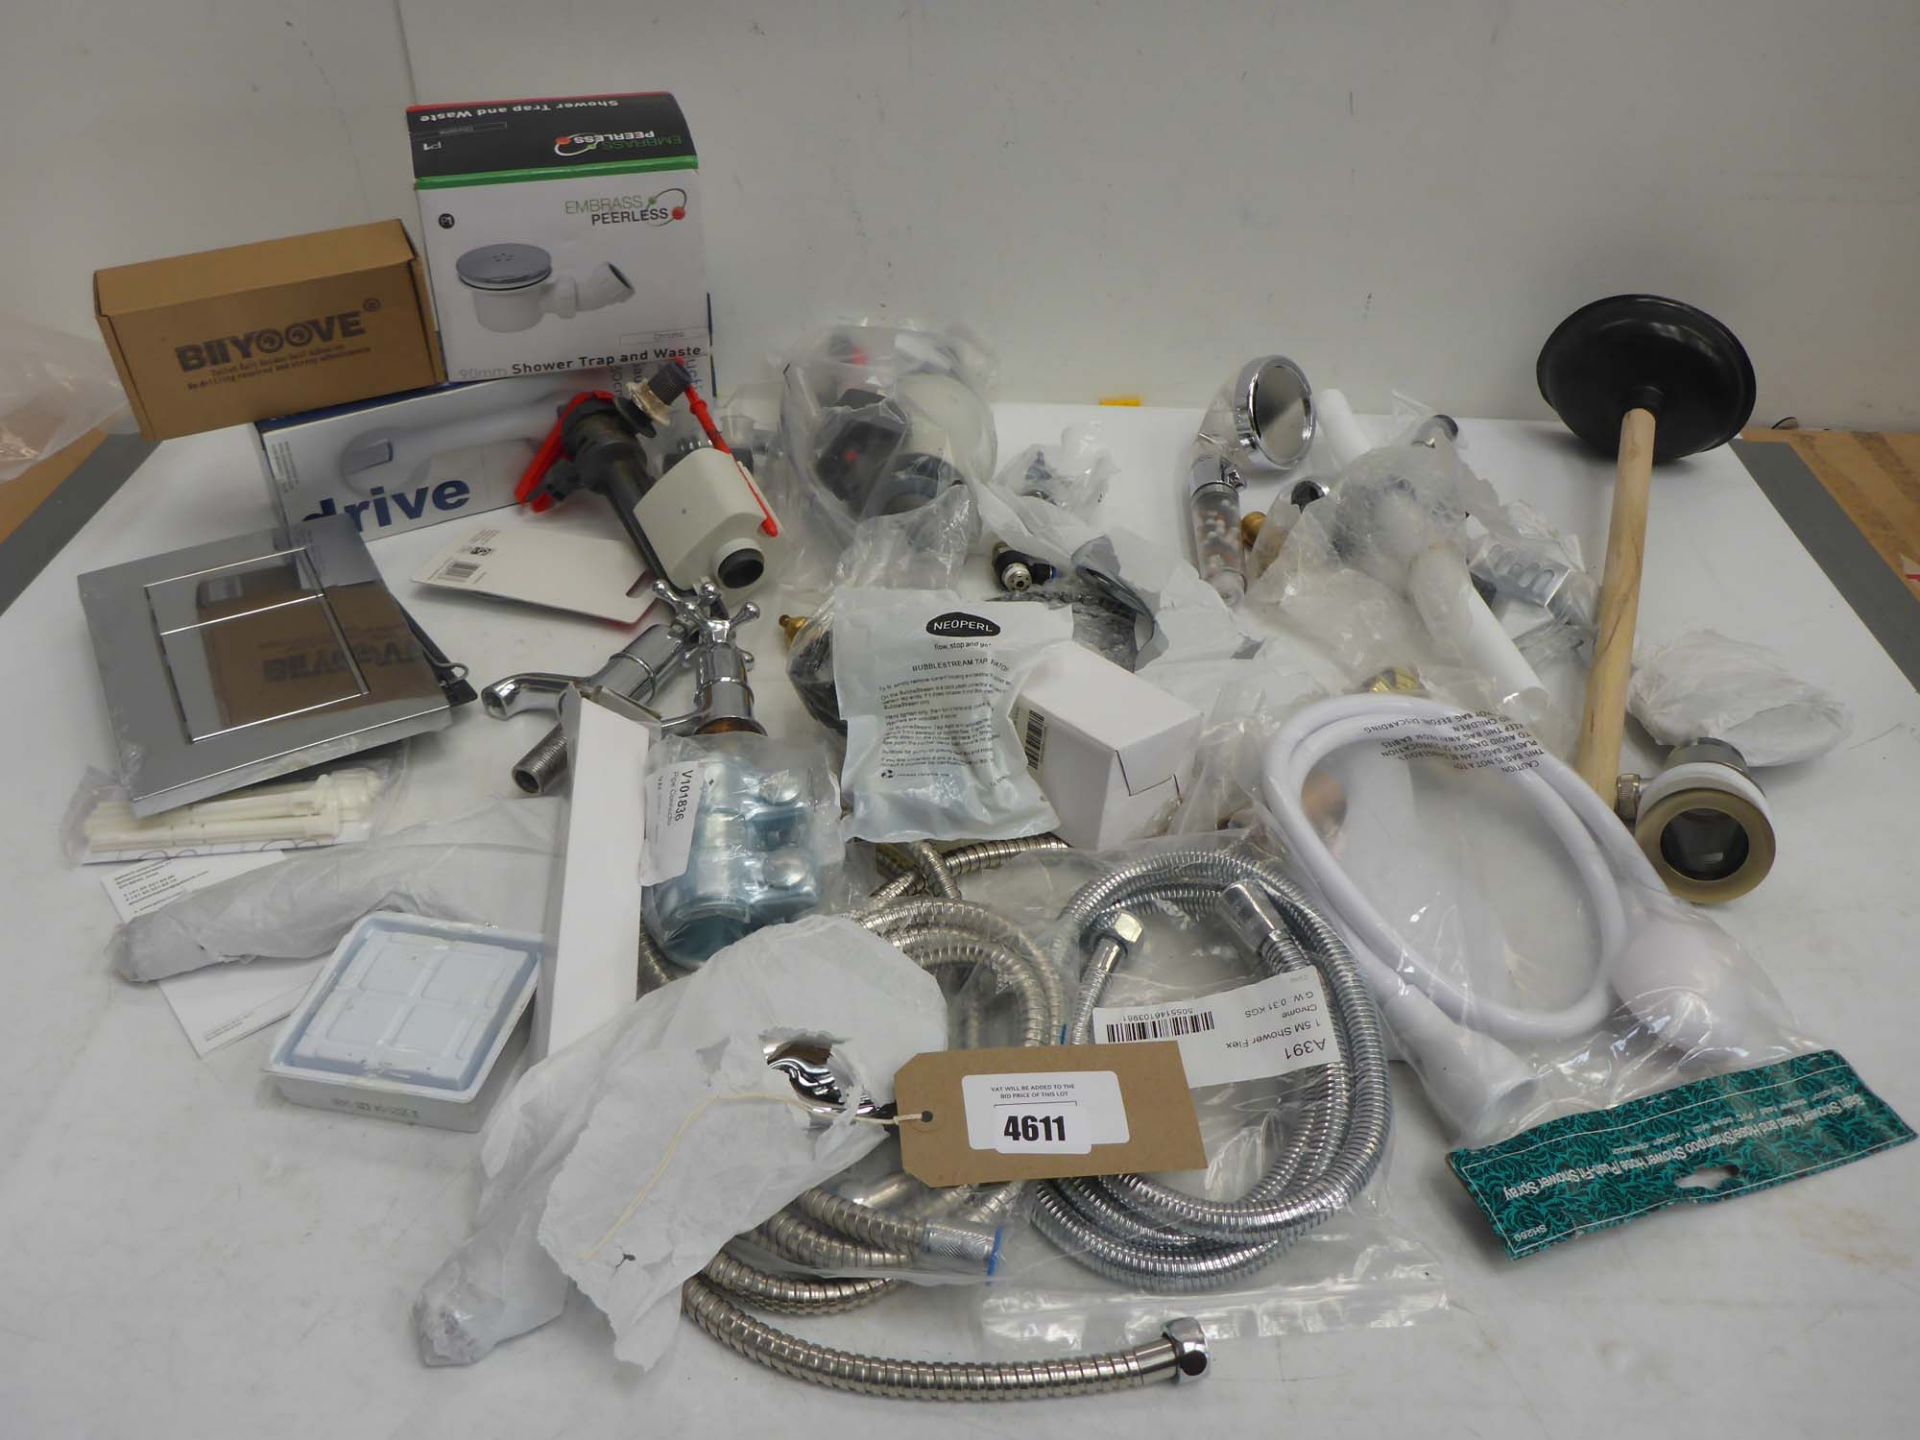 Plumbing accessories including shower heads, hoses, tap aerators, trap & waste, valves, taps etc